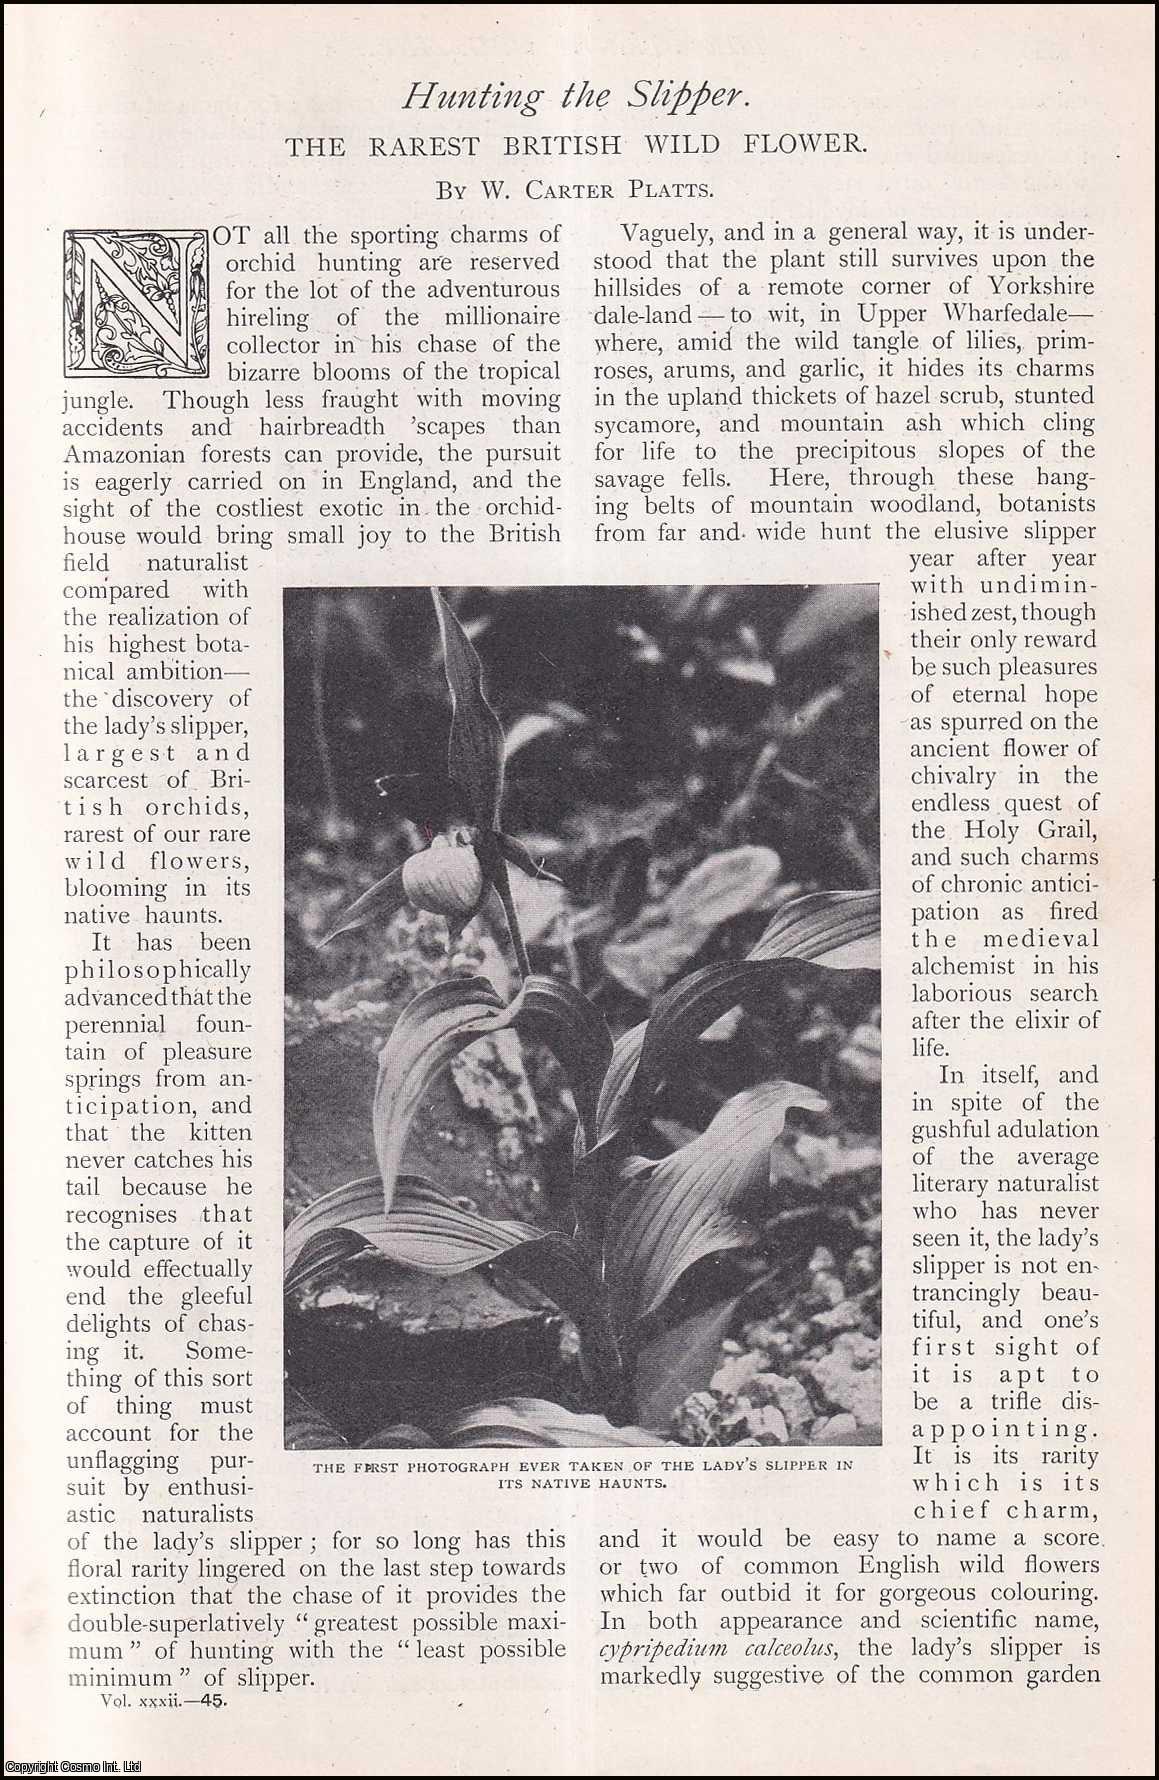 W. Carter Platts - Hunting the Slipper : the Rarest British Wild Flower. An uncommon original article from The Strand Magazine, 1906.